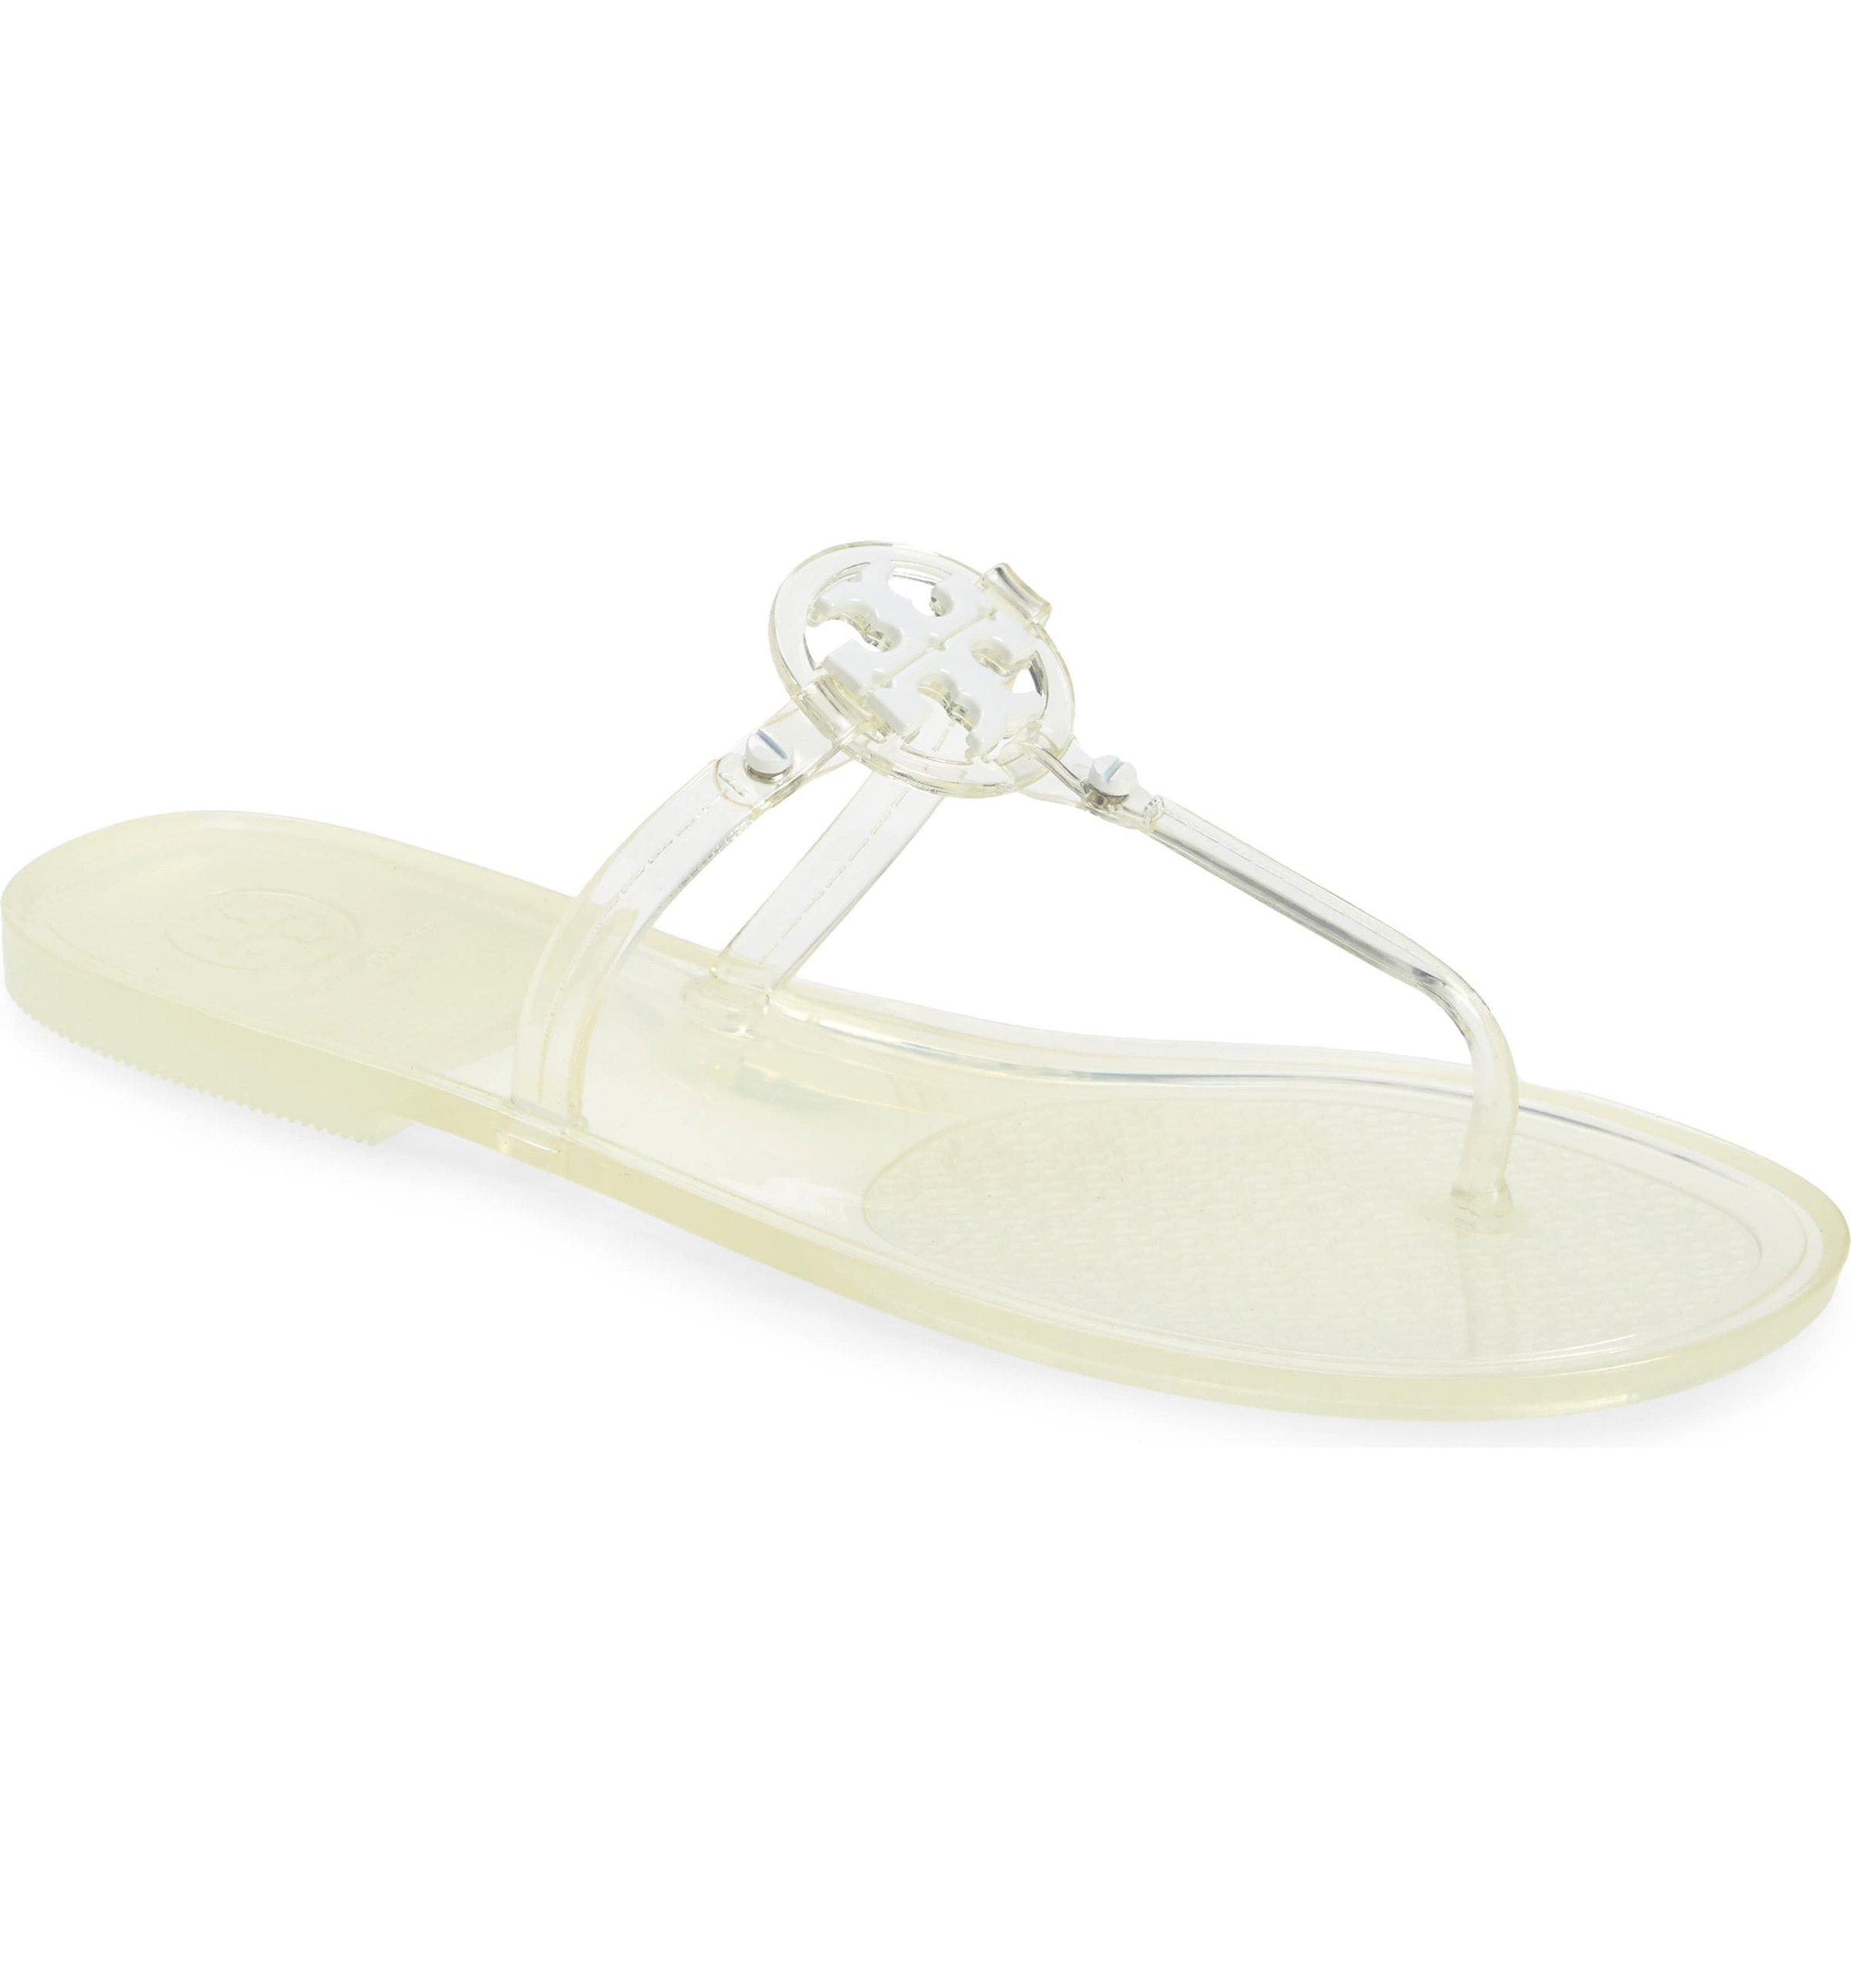 Tory Burch Slide Sandals: Our Absolute Favorites From Nordstrom | UsWeekly